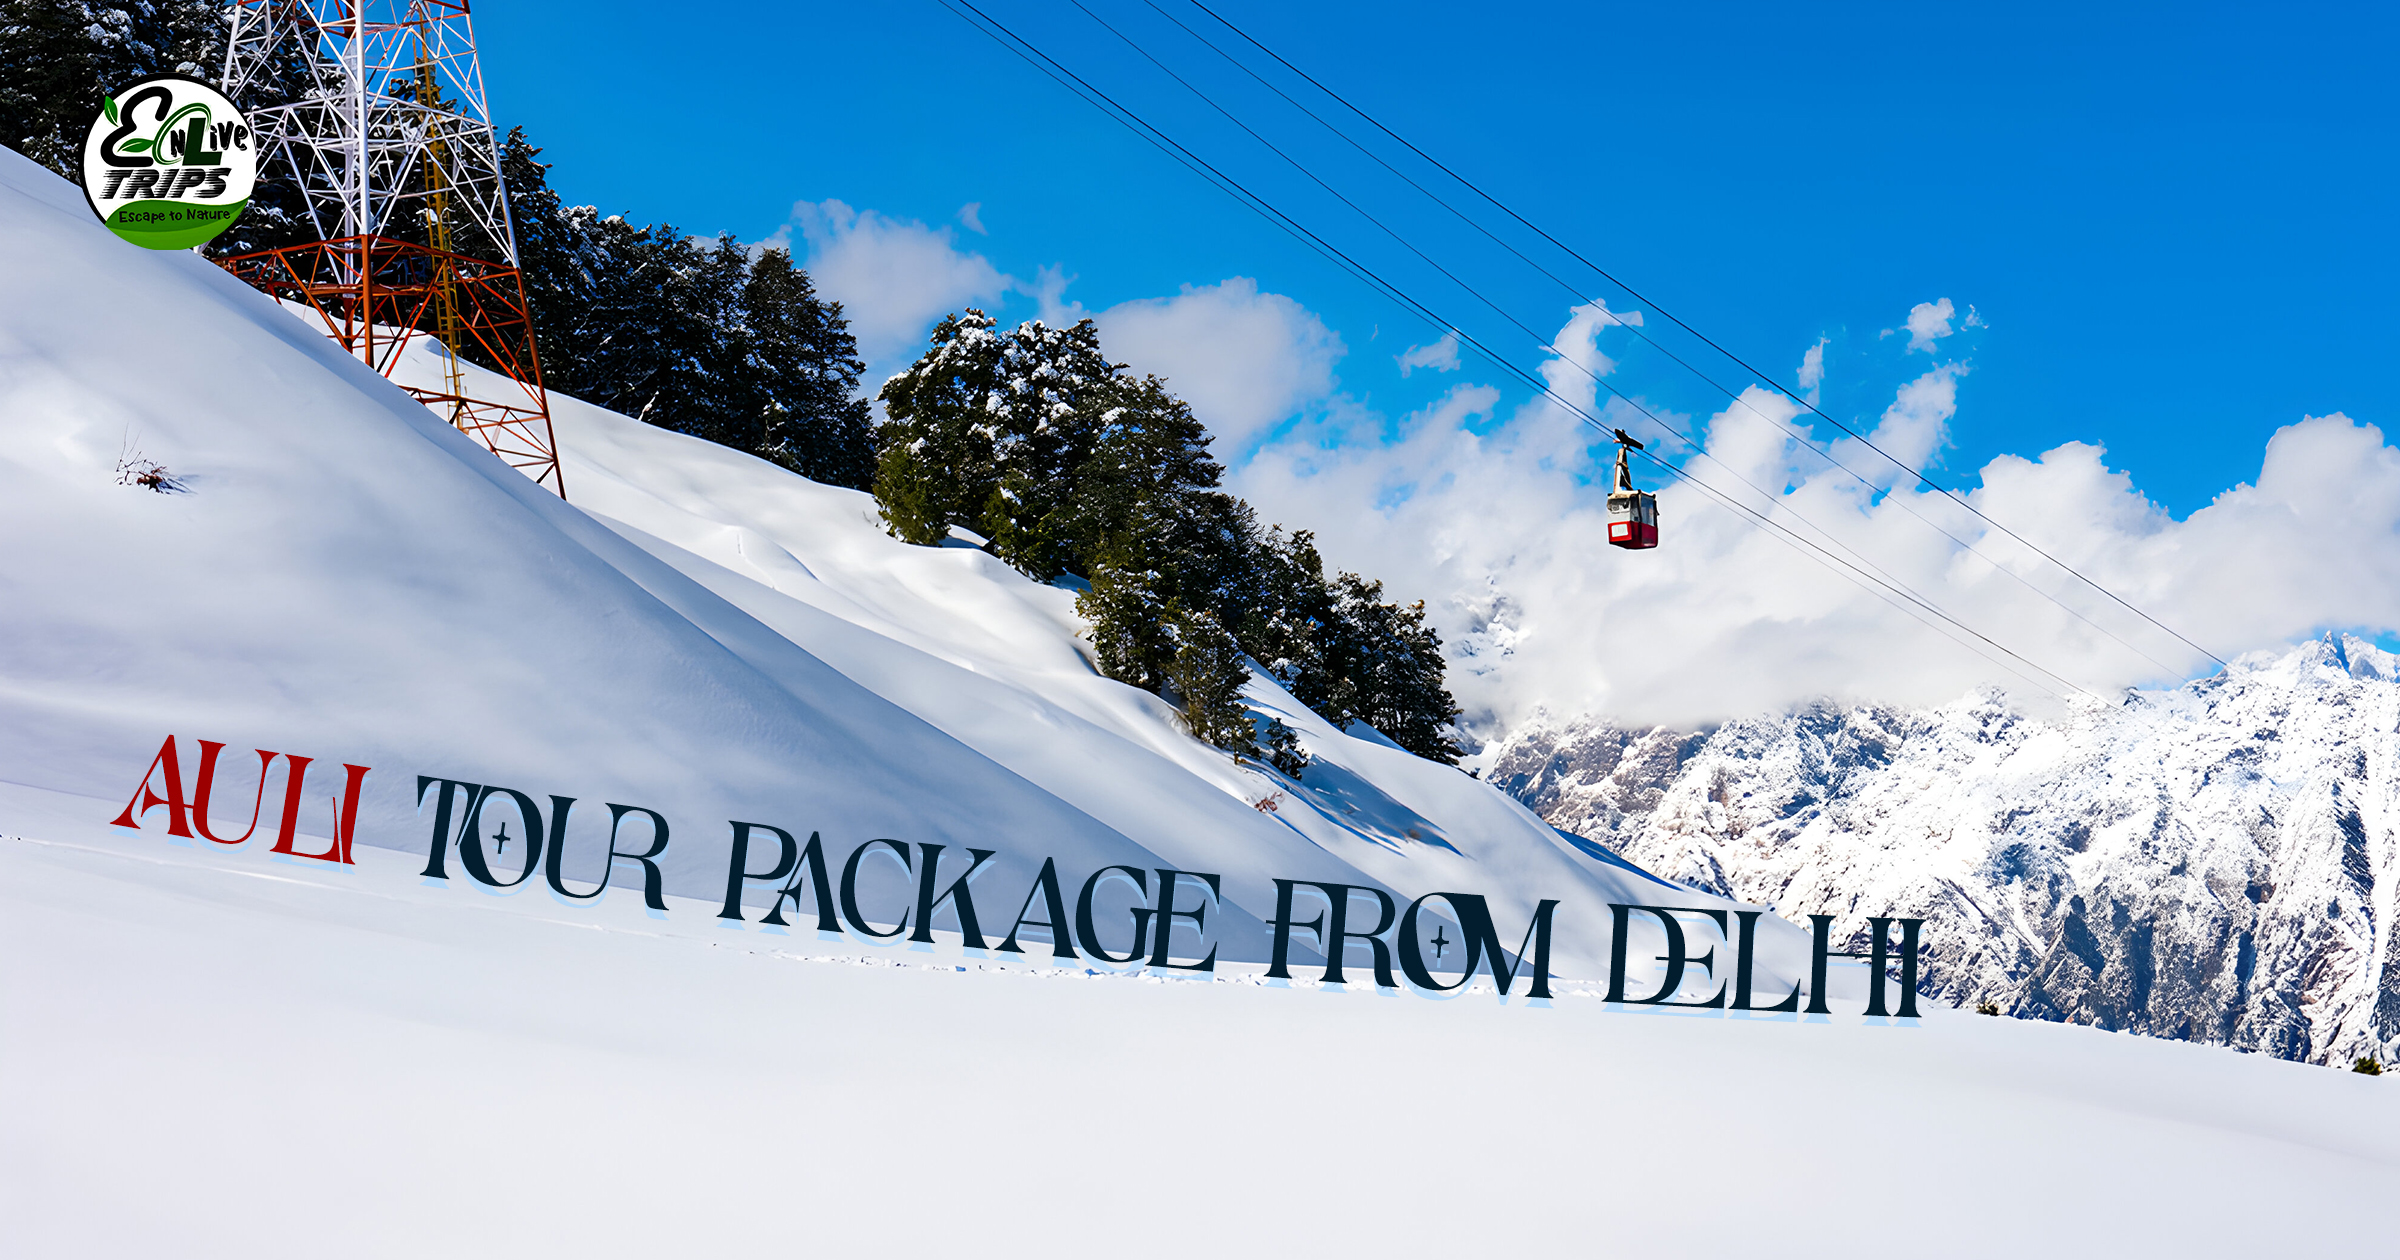 Auli packages from Delhi